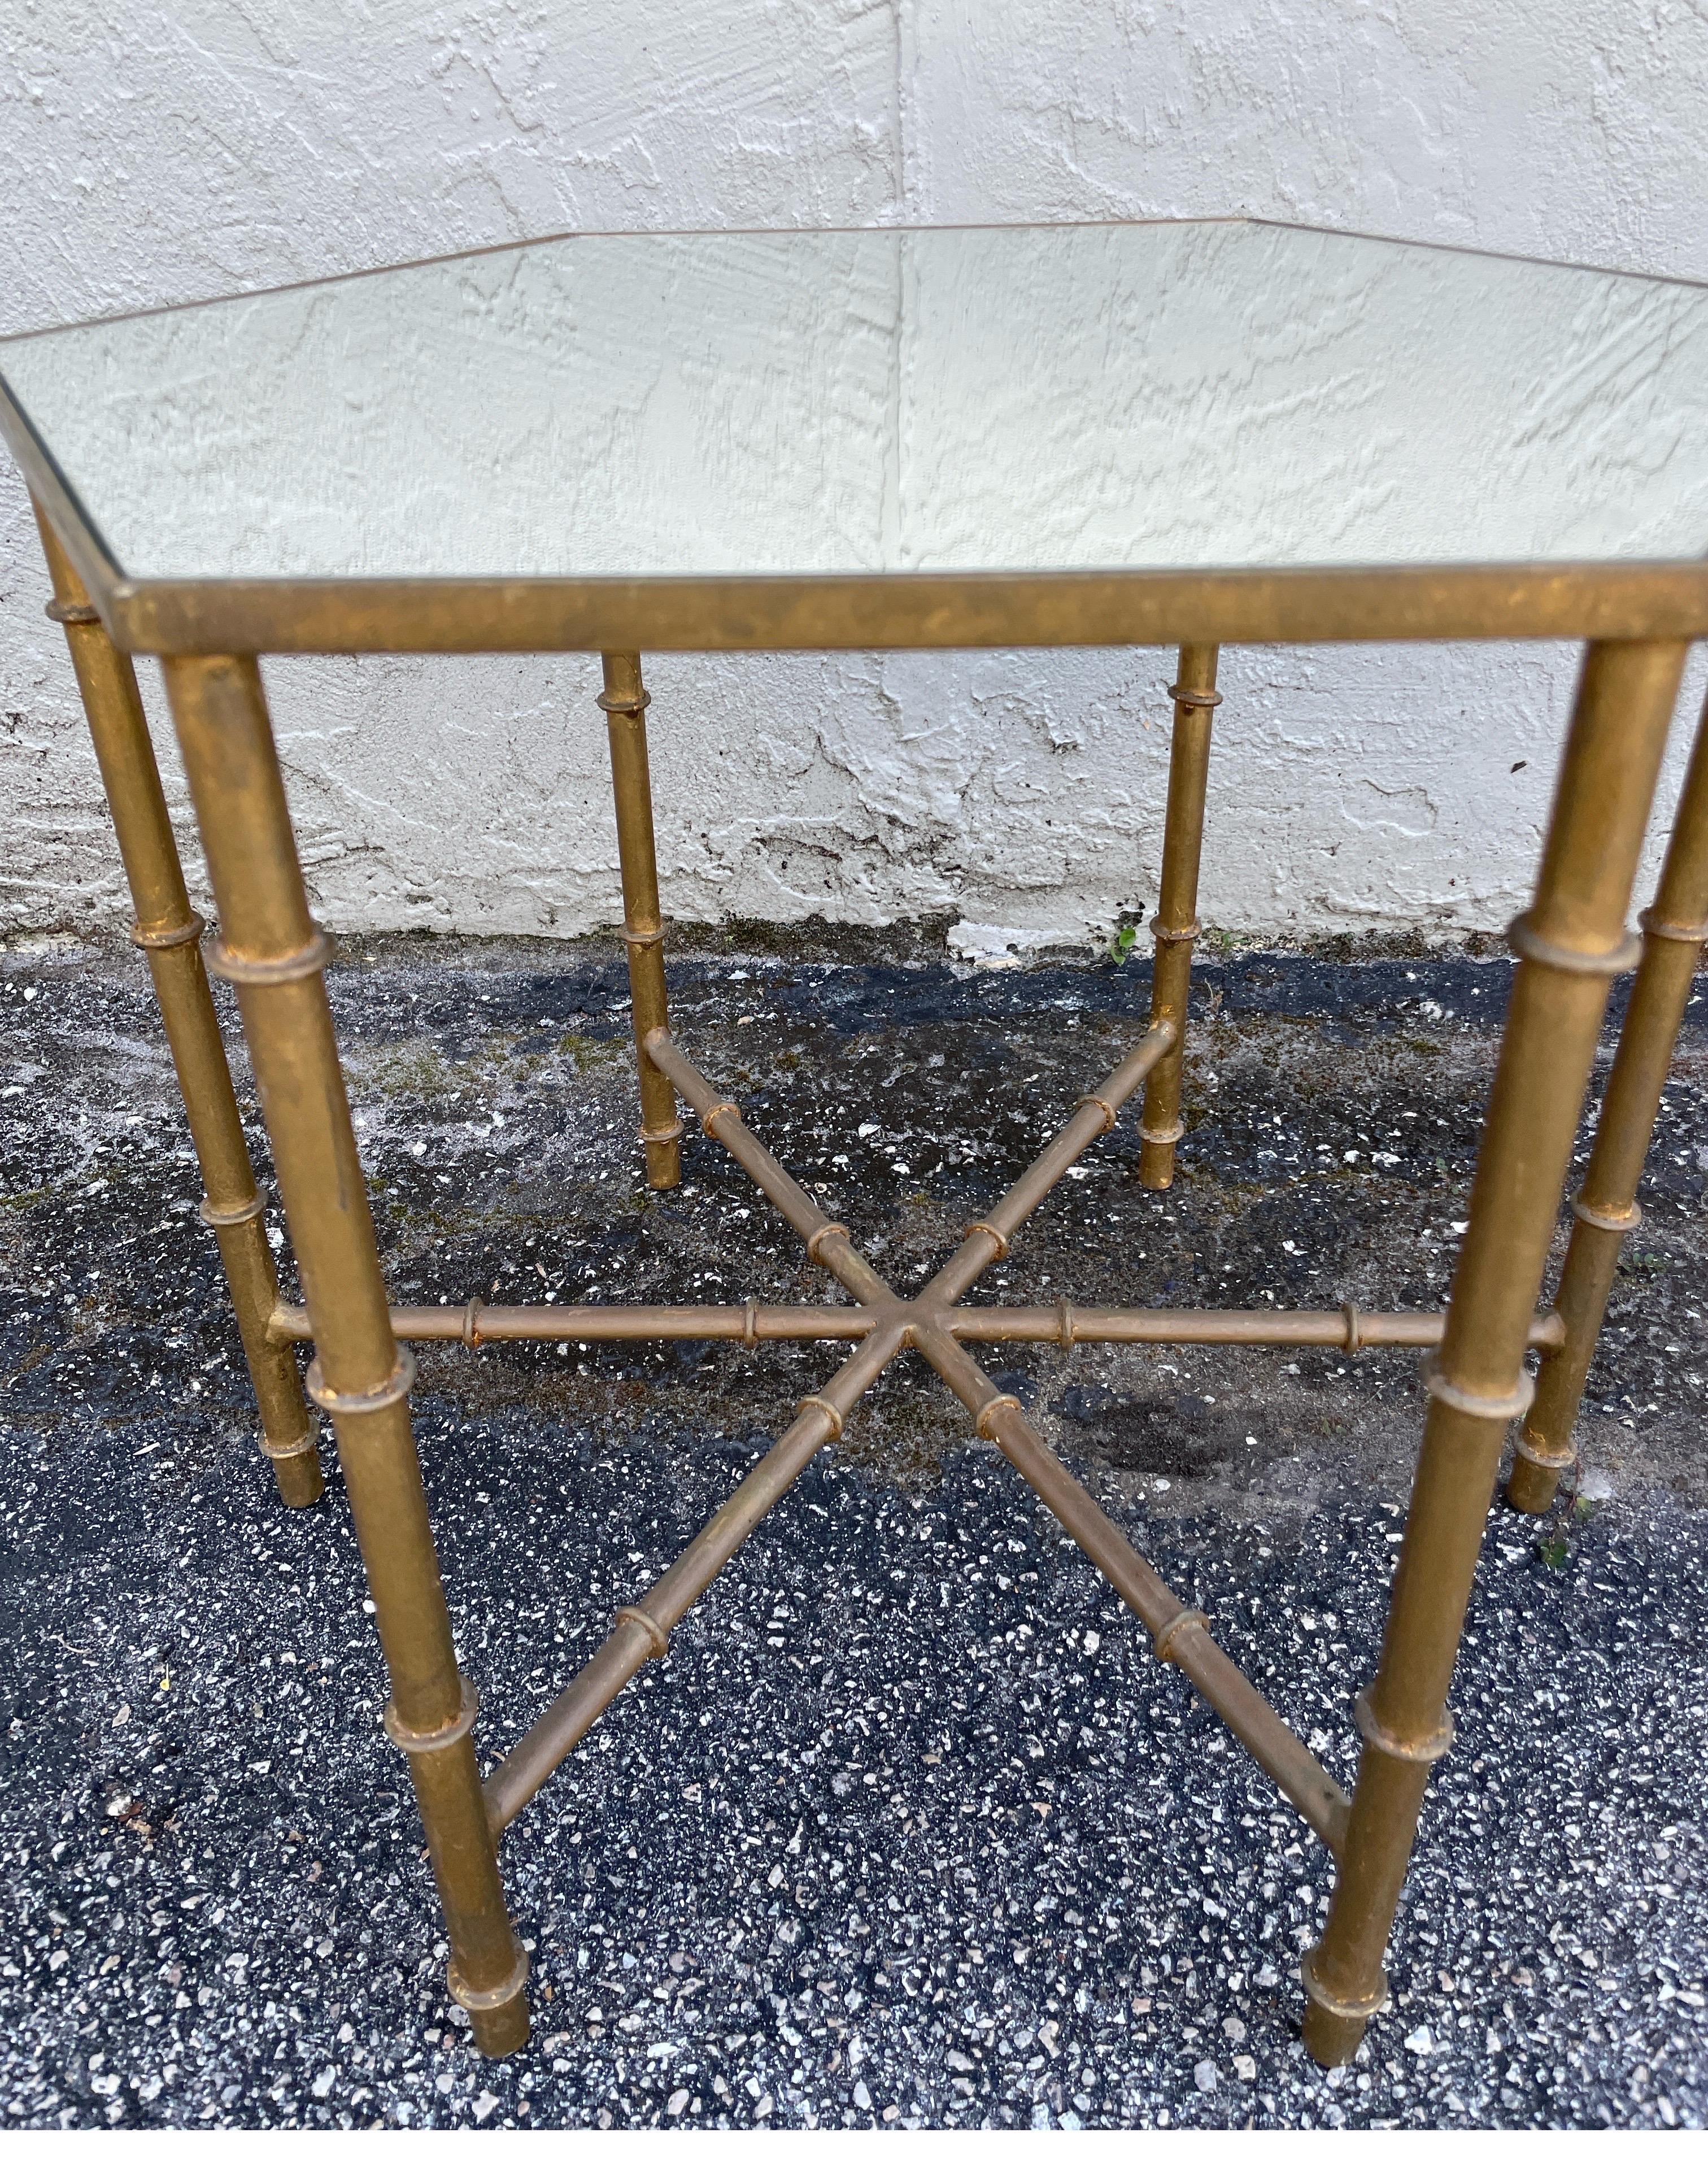 Small Italian gilded metal octagonal drinks table with mirrored top.